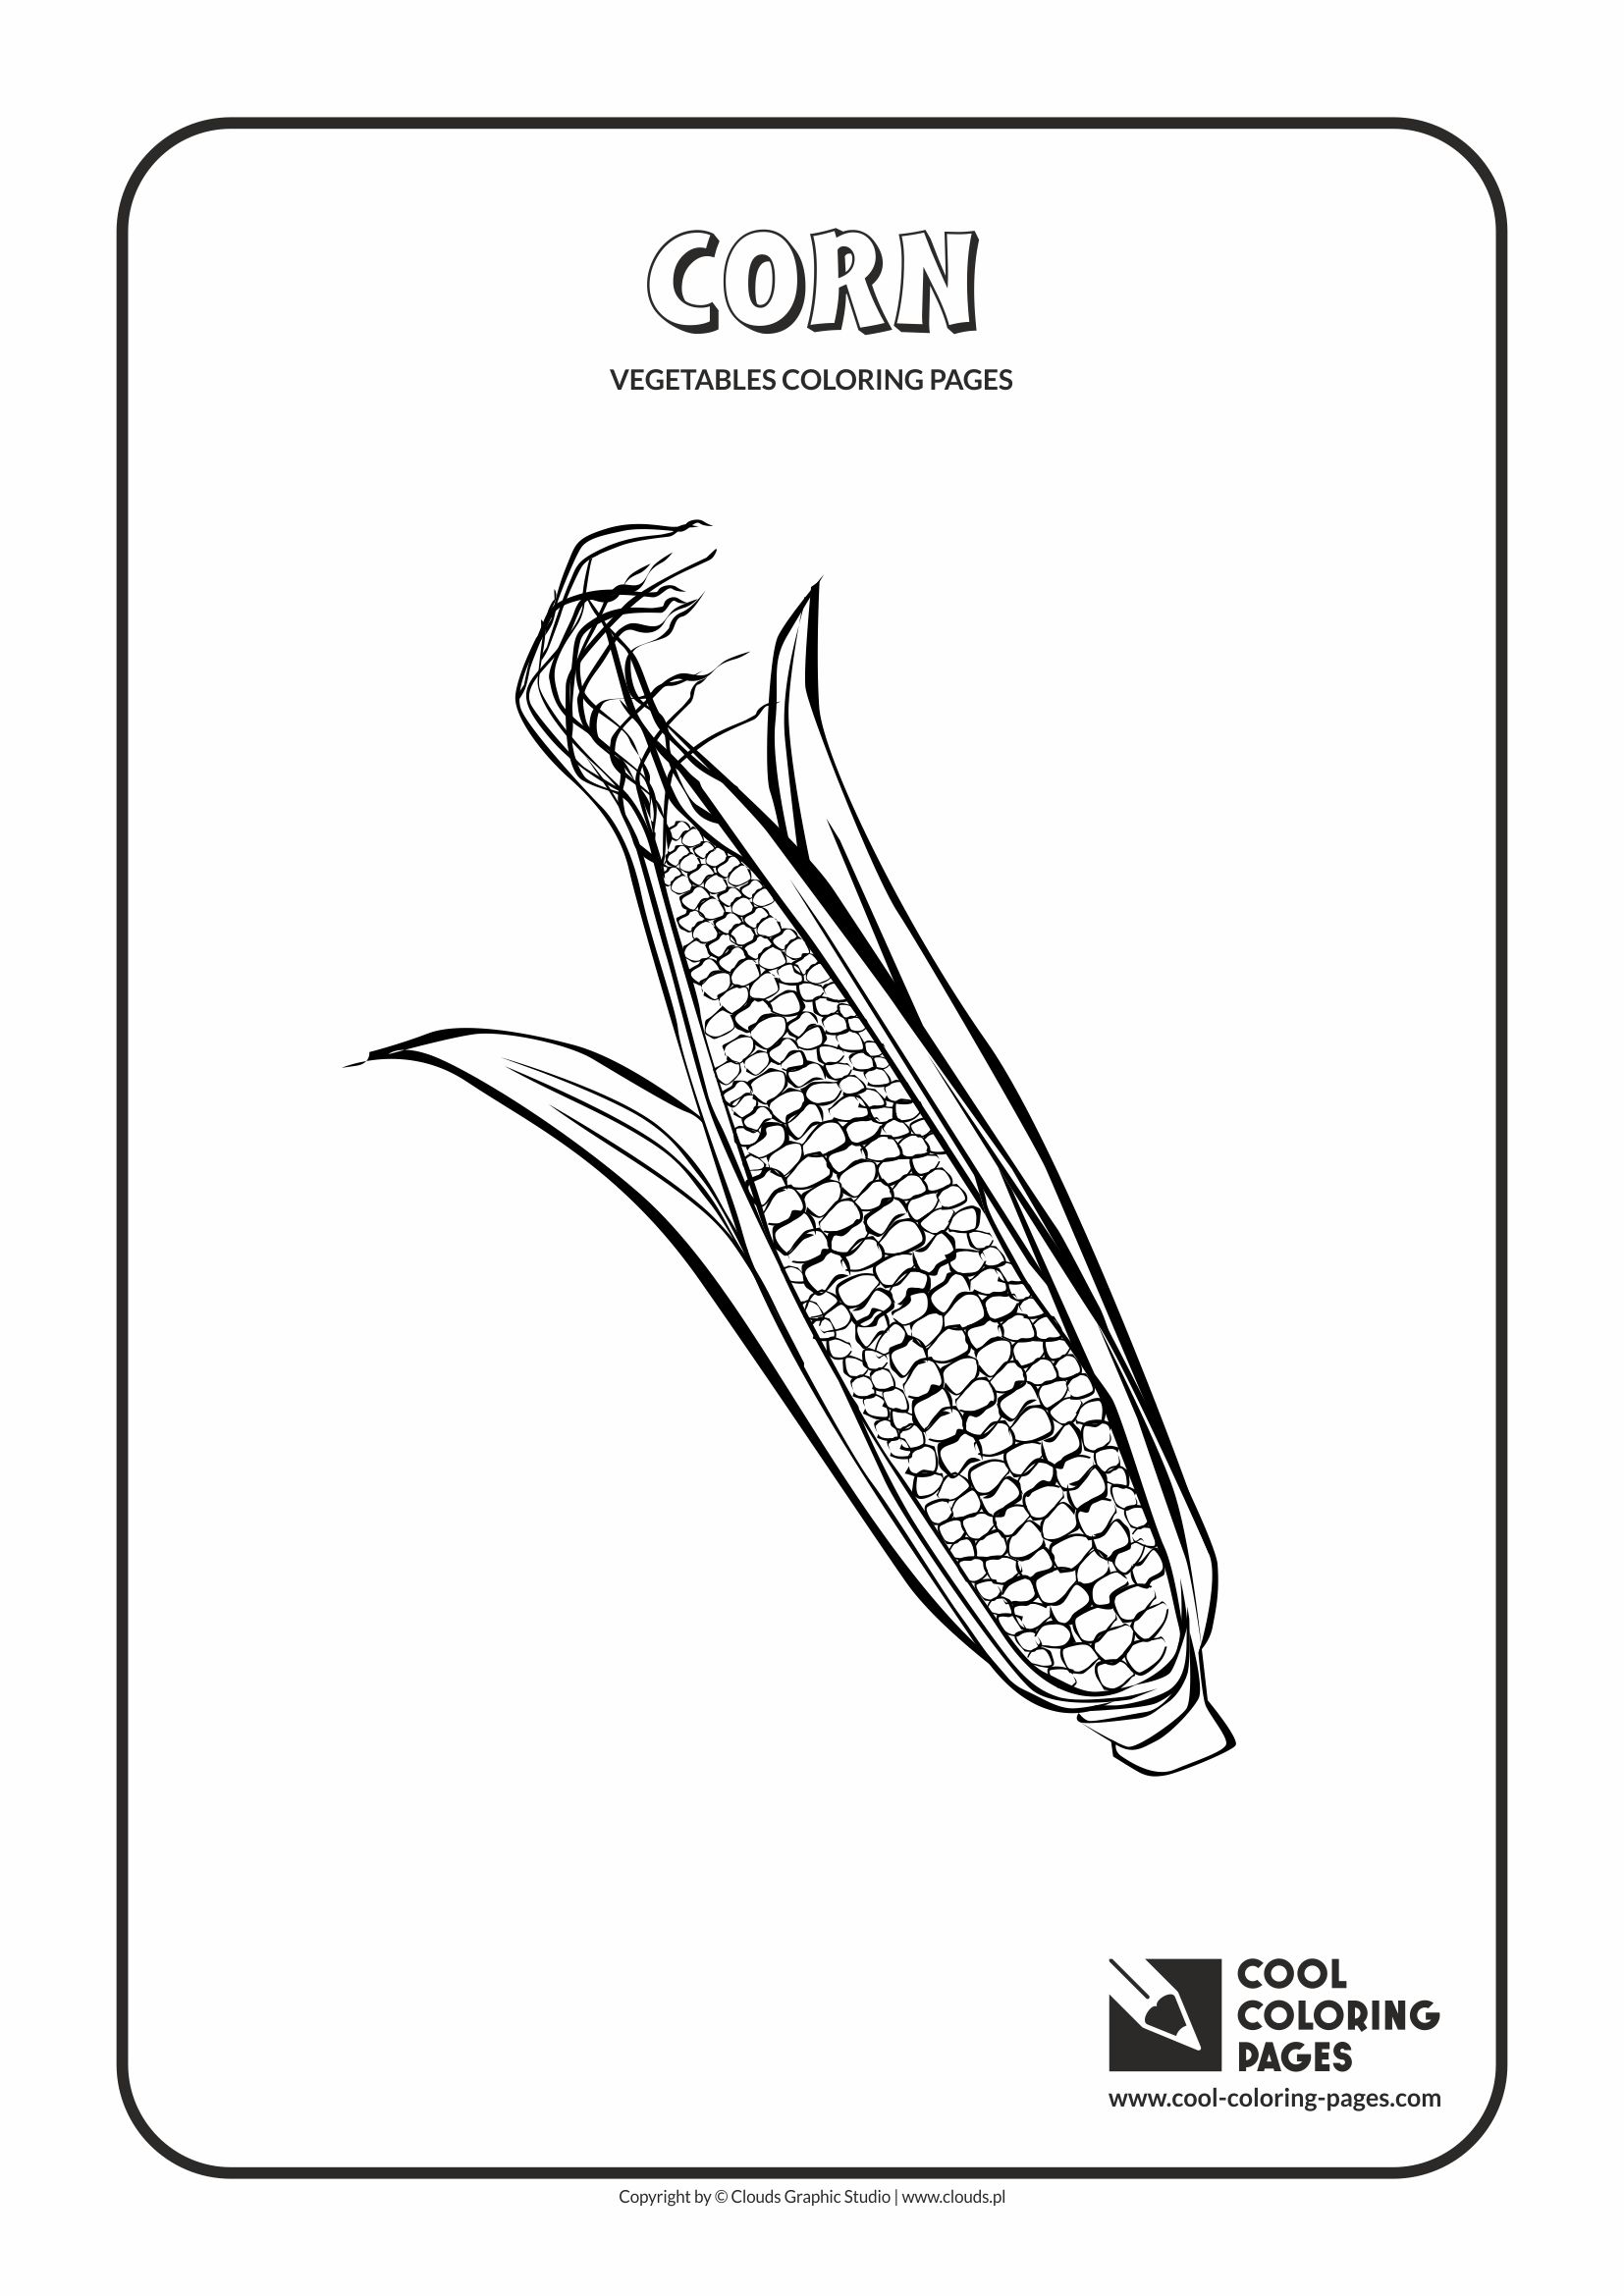 Cool Coloring Pages - Plants / Corn / Coloring page with corn